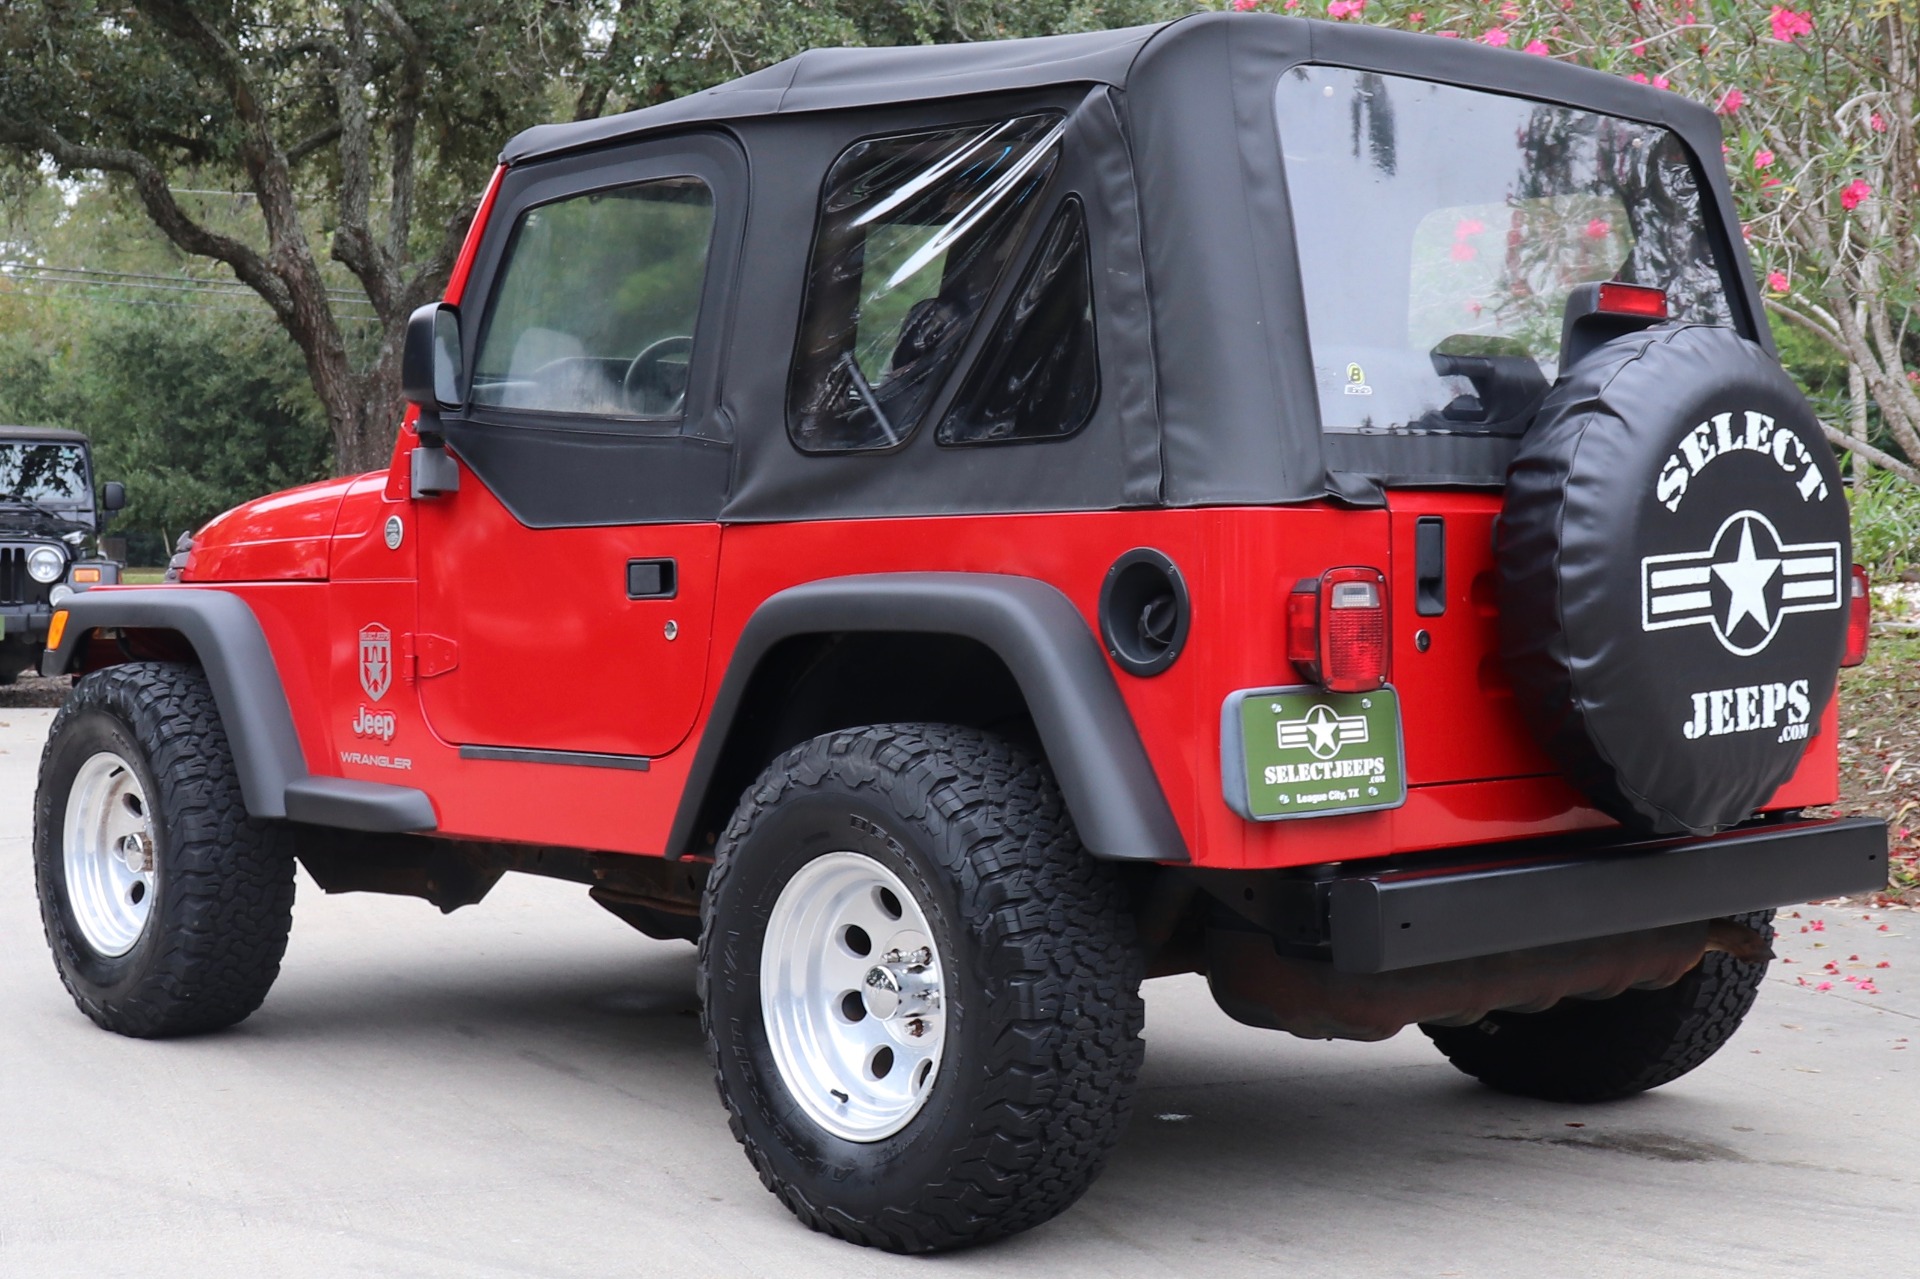 Used 2006 Jeep Wrangler SE For Sale (14,995) Select